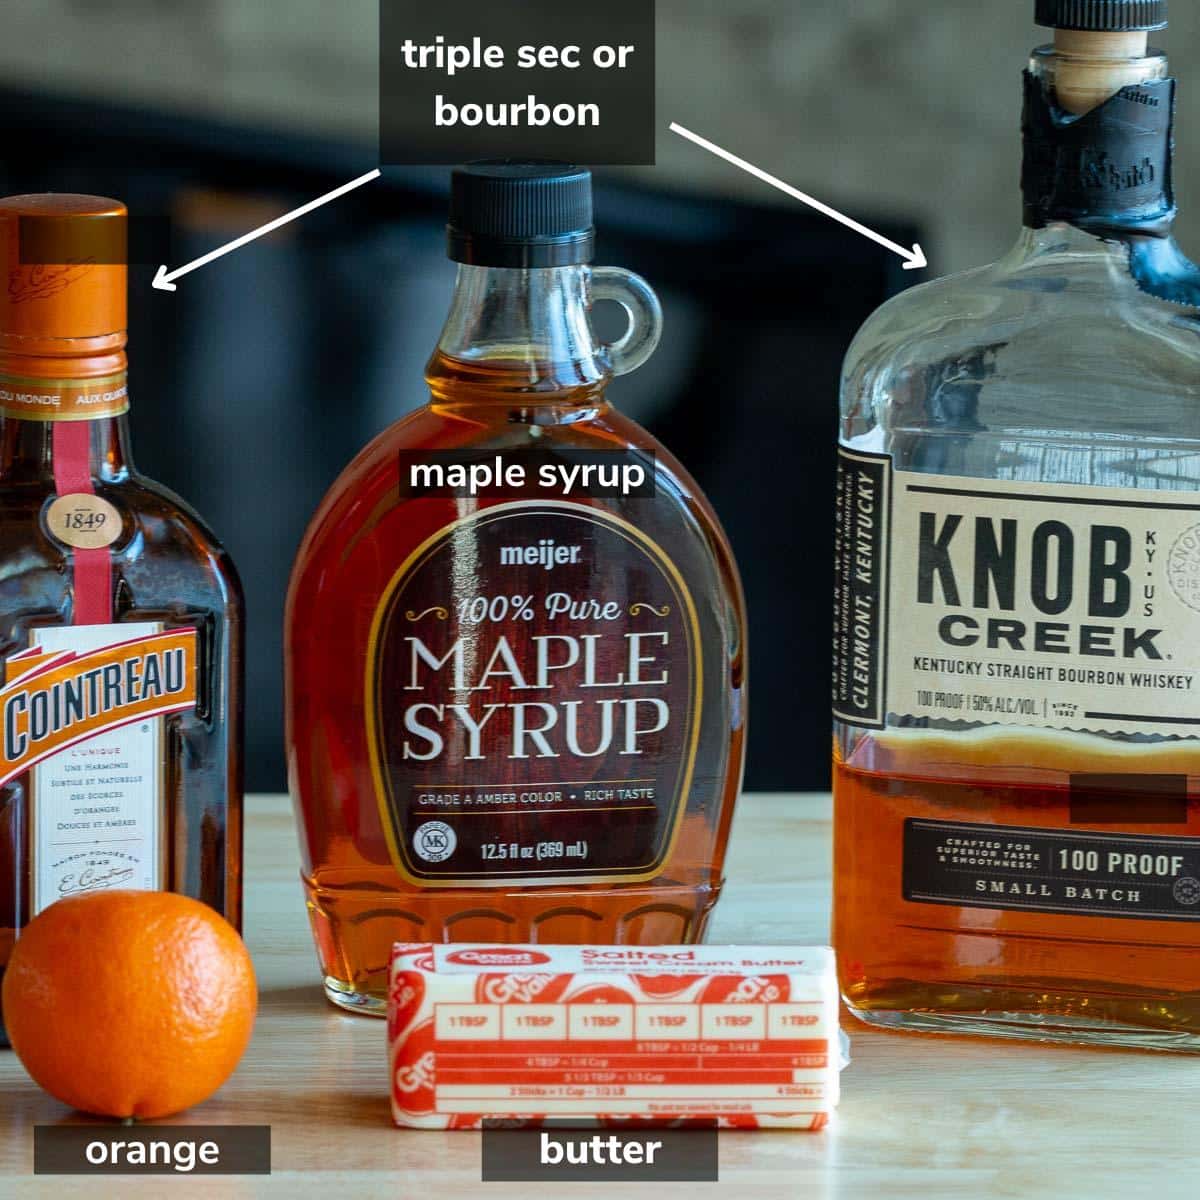 Ingredients to maple bourbon syrup or triple sec syrup.